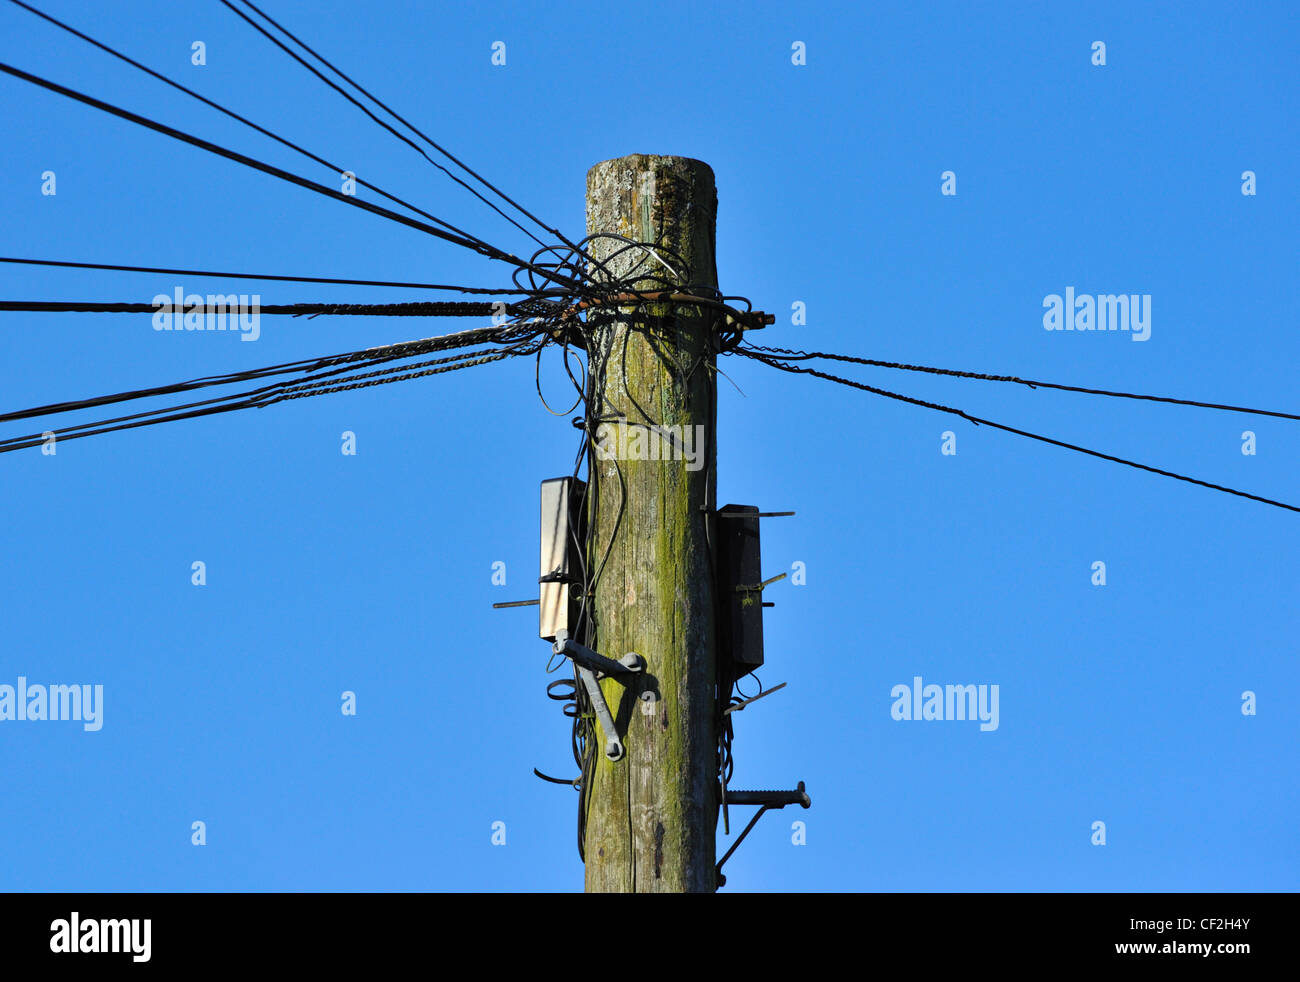 Detail of wooden telegraph pole and wires. Stock Photo